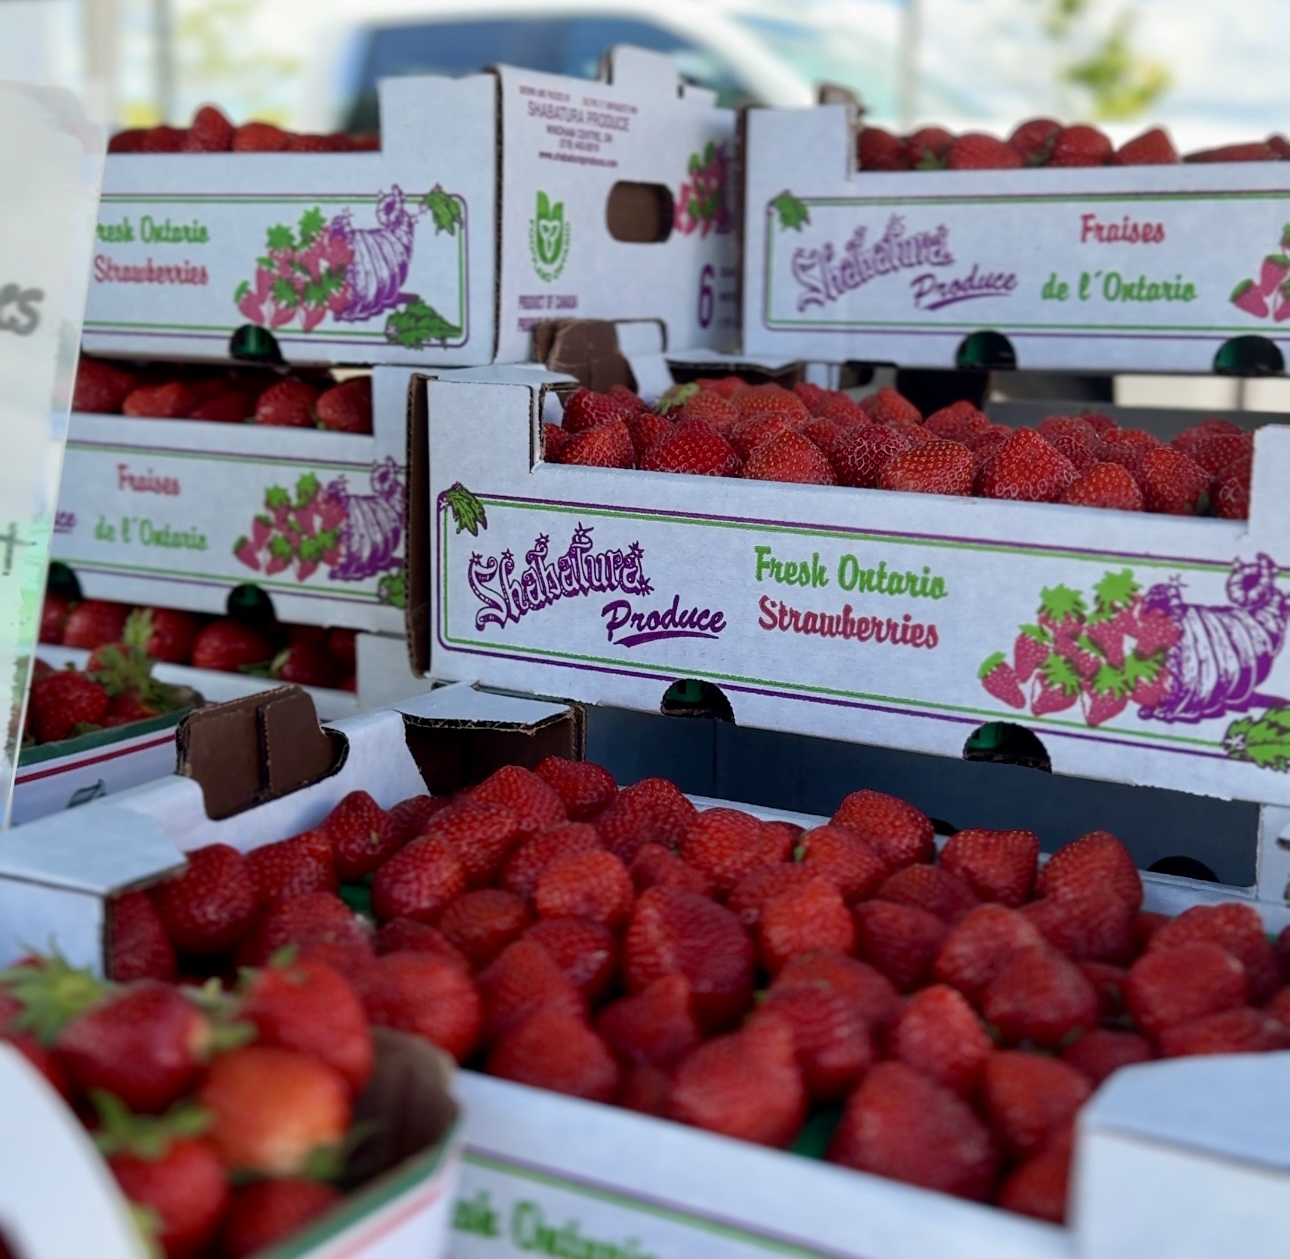 Image of flats of strawberries stacked high at a farmer's market